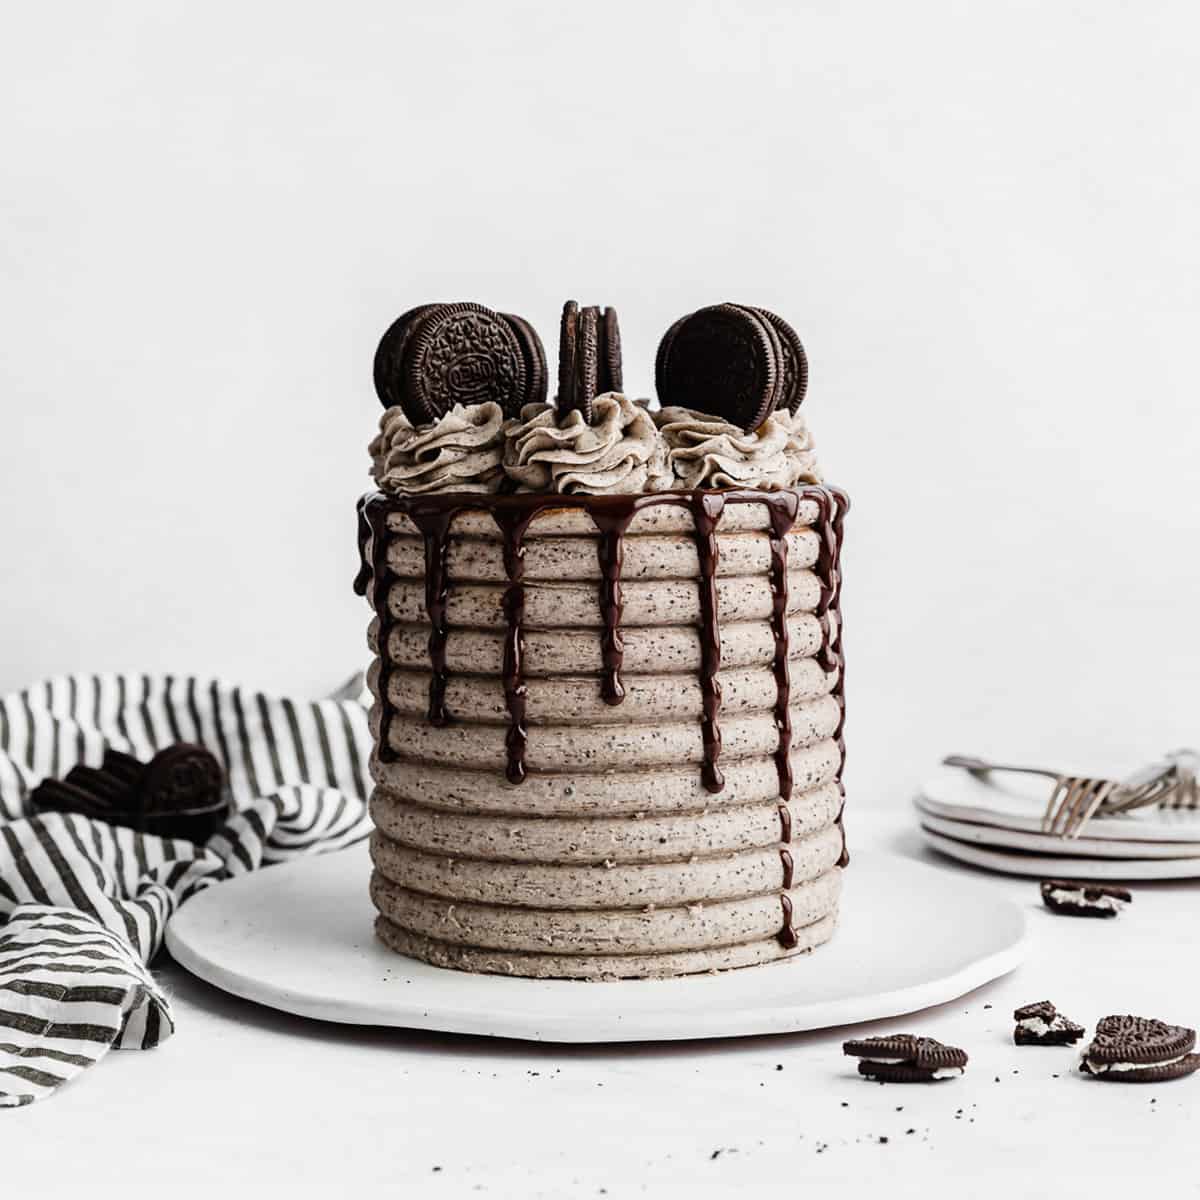 A Coconut Cookies and Cream Cake on a white plate against a white background.